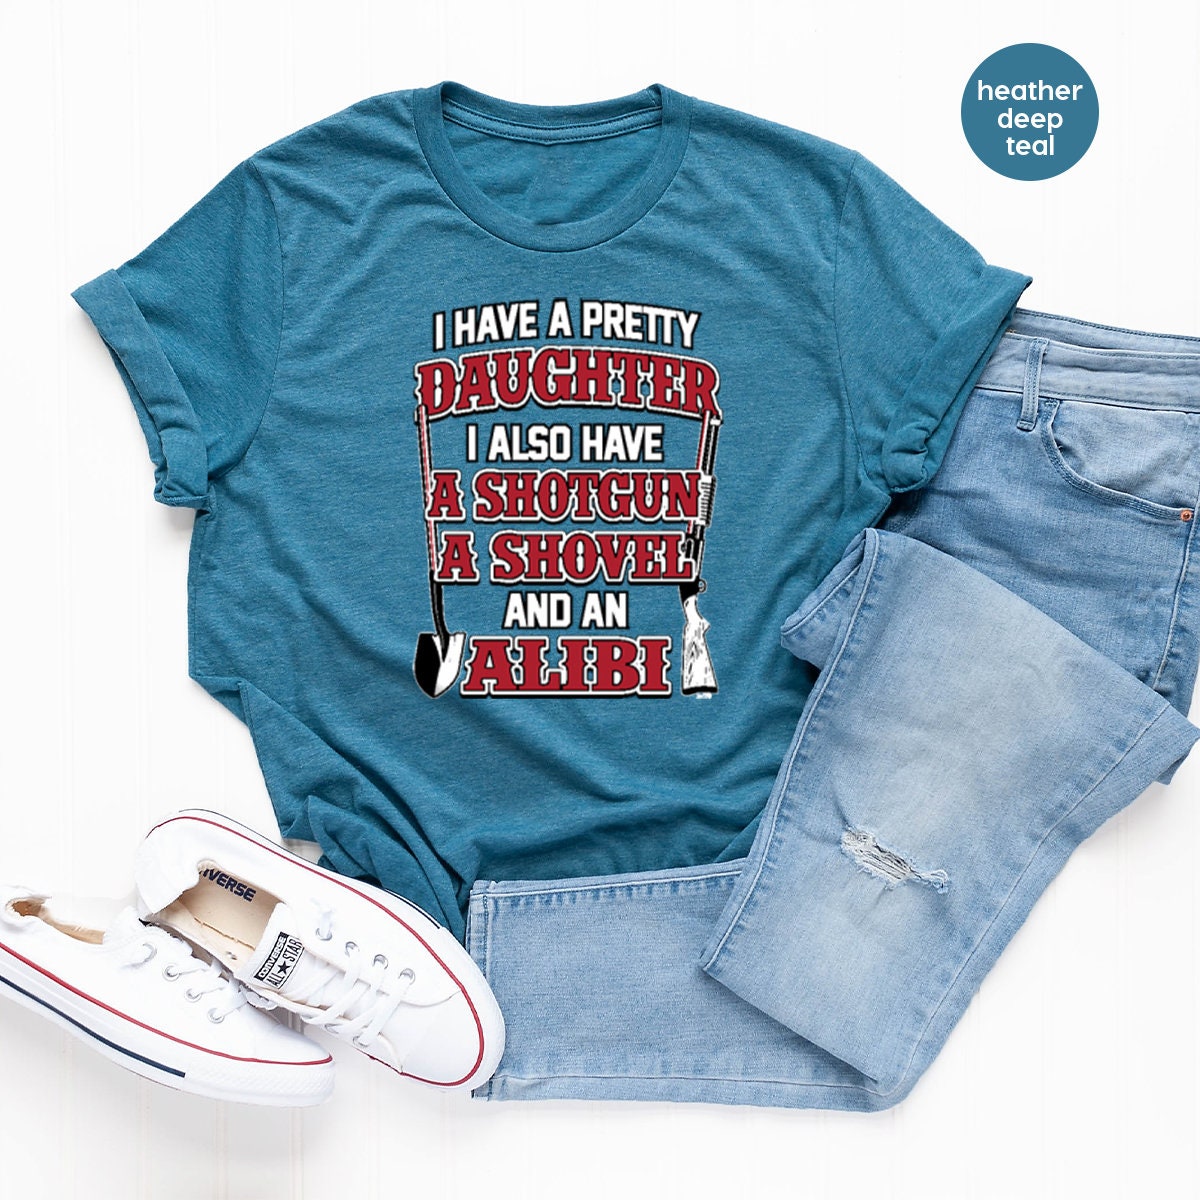 Dad Shirt, Funny Dad Shirt, Dad T Shirt, Daddy Shirts,  Gun Lover Dad Tee, I Have A Pretty Daughter I Also Have A Gun A Shovel And An Alibi - Fastdeliverytees.com